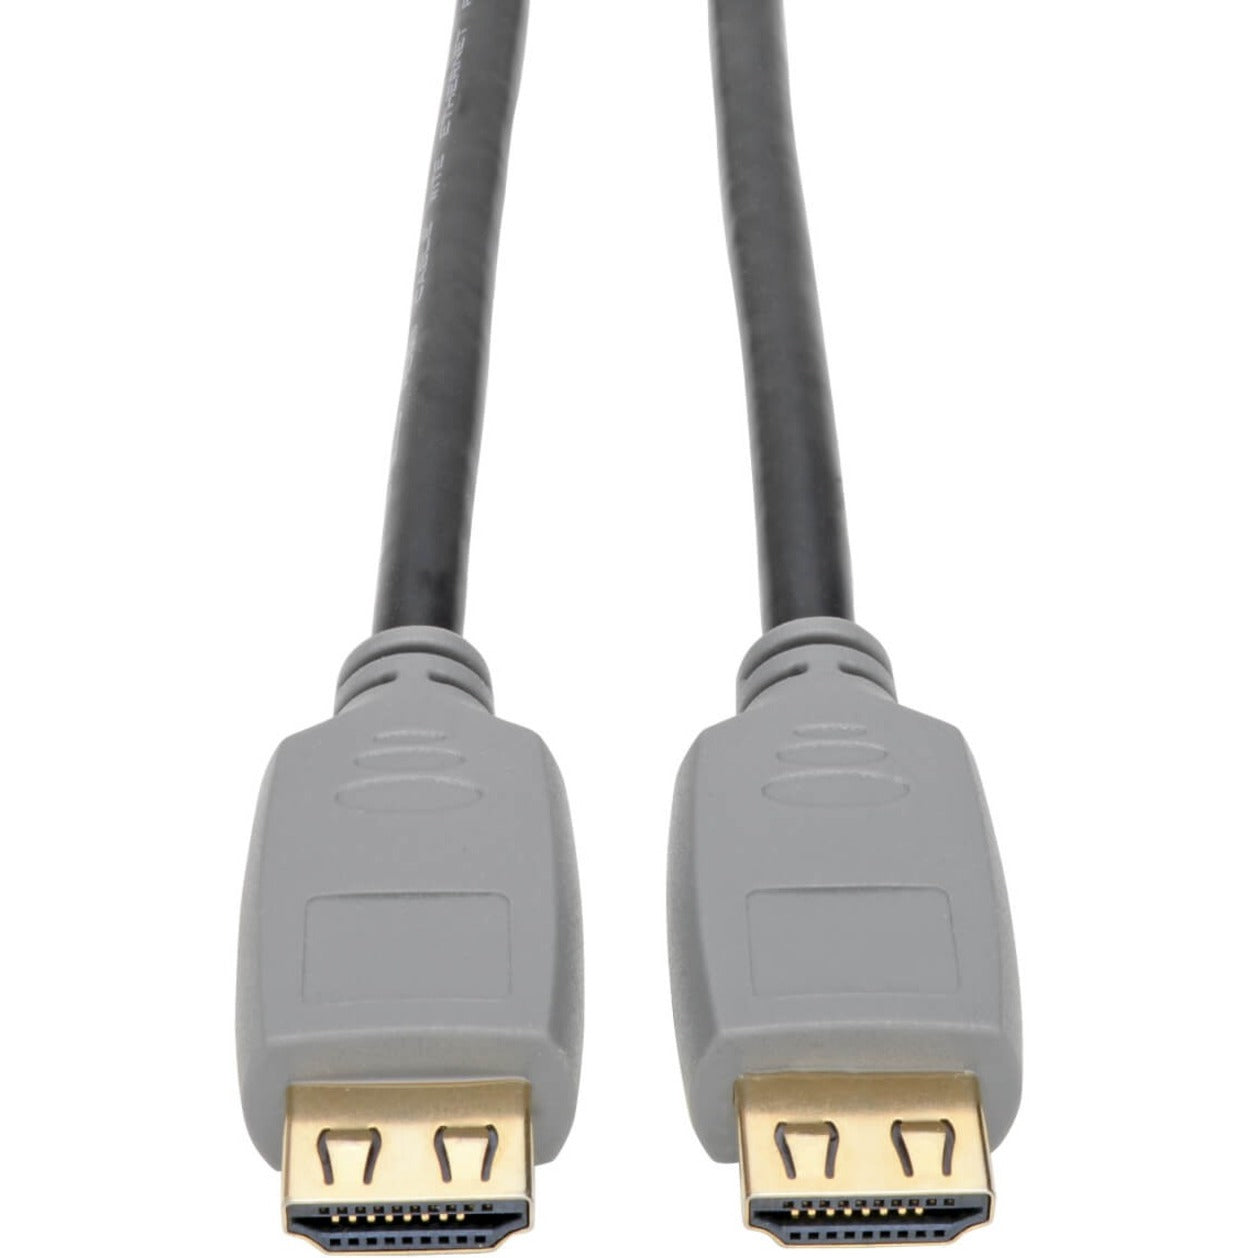 Tripp Lite P568-03M-2A High-Speed HDMI 2.0a Cable with Gripping Connectors, M/M, 3m, 4K @ 60Hz, Black